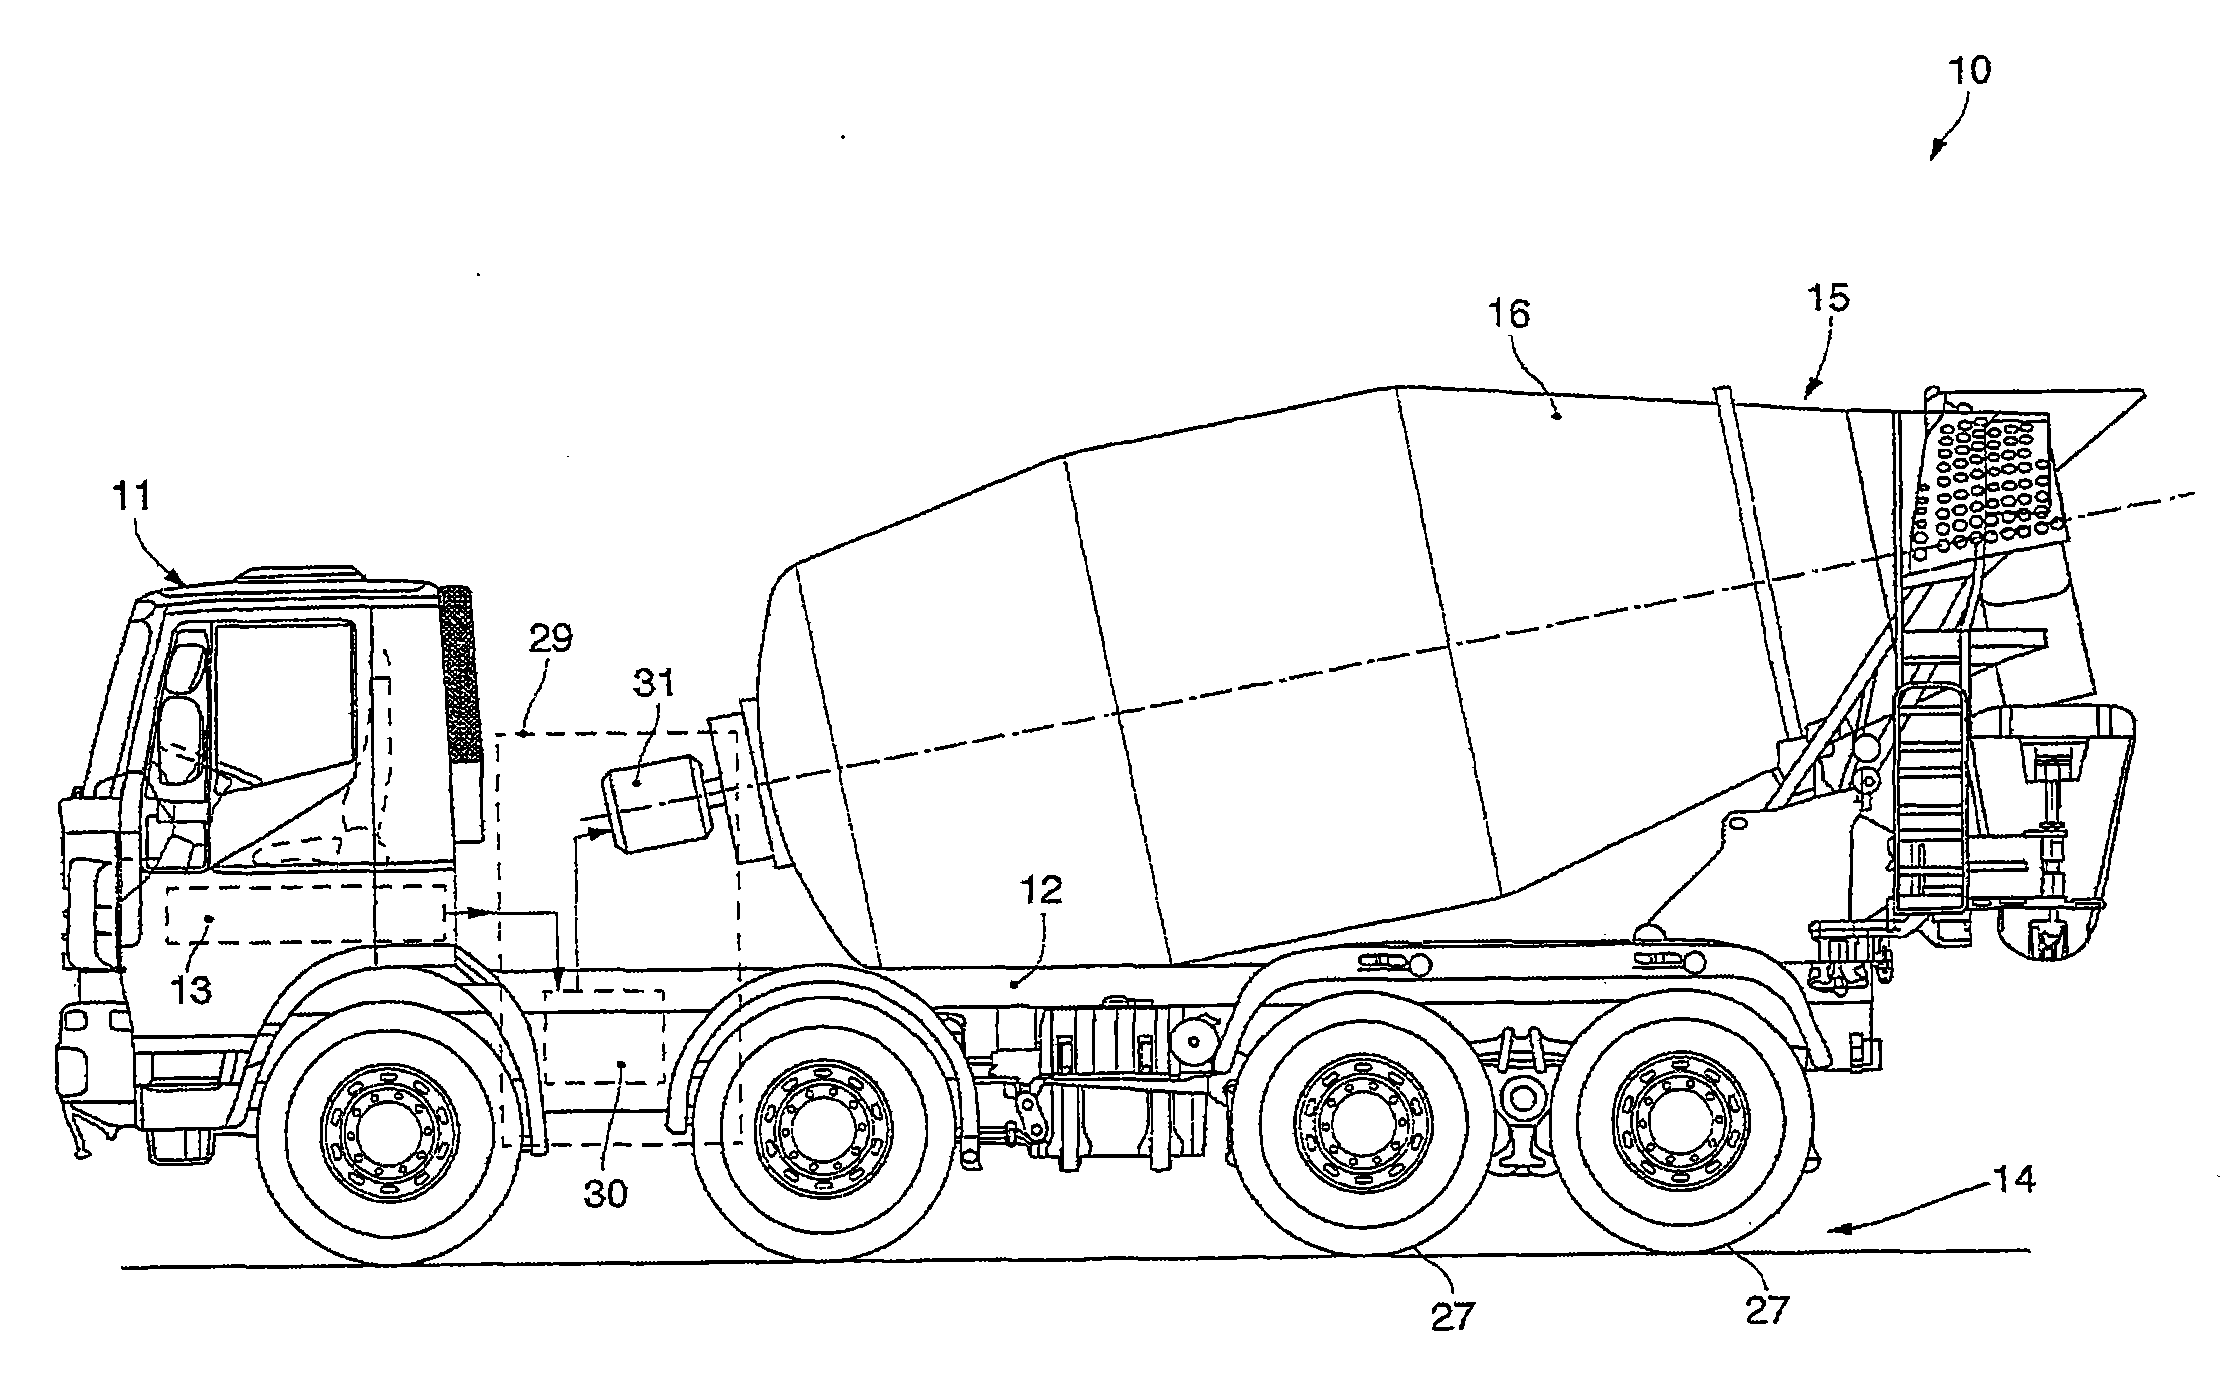 Concrete mixer with perfected auxiliary device